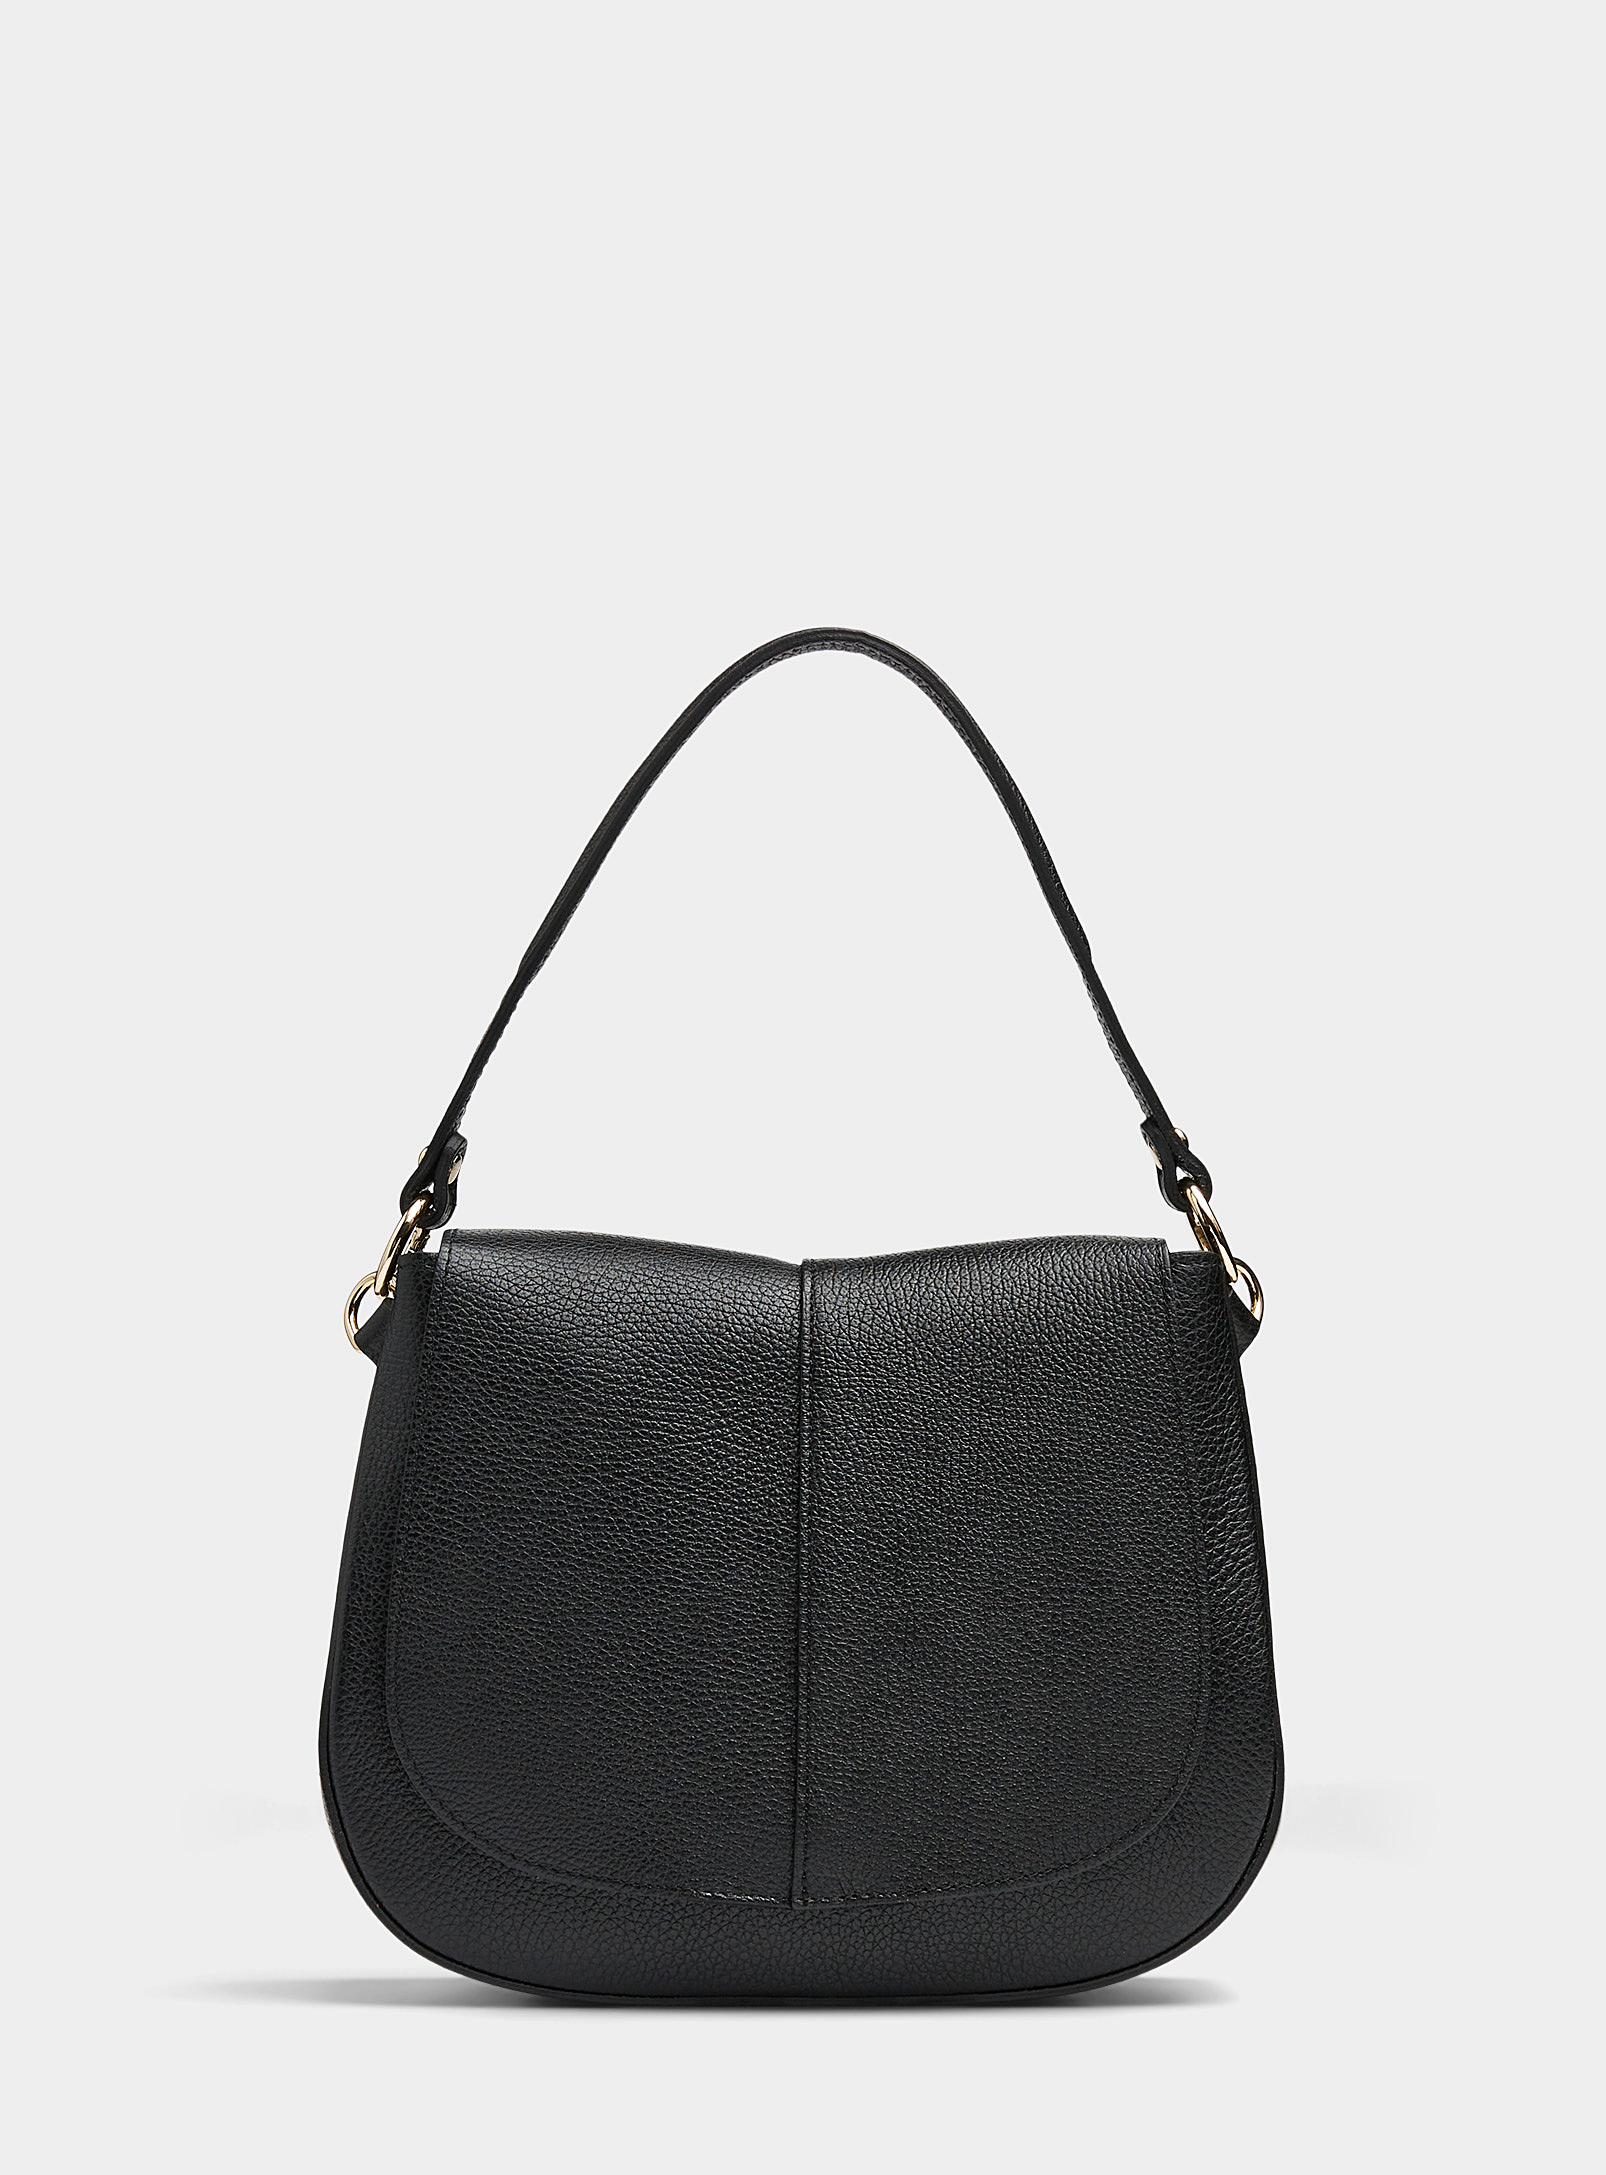 Simons - Women's Pebbled leather rounded flap bag Exclusive collection from Italy